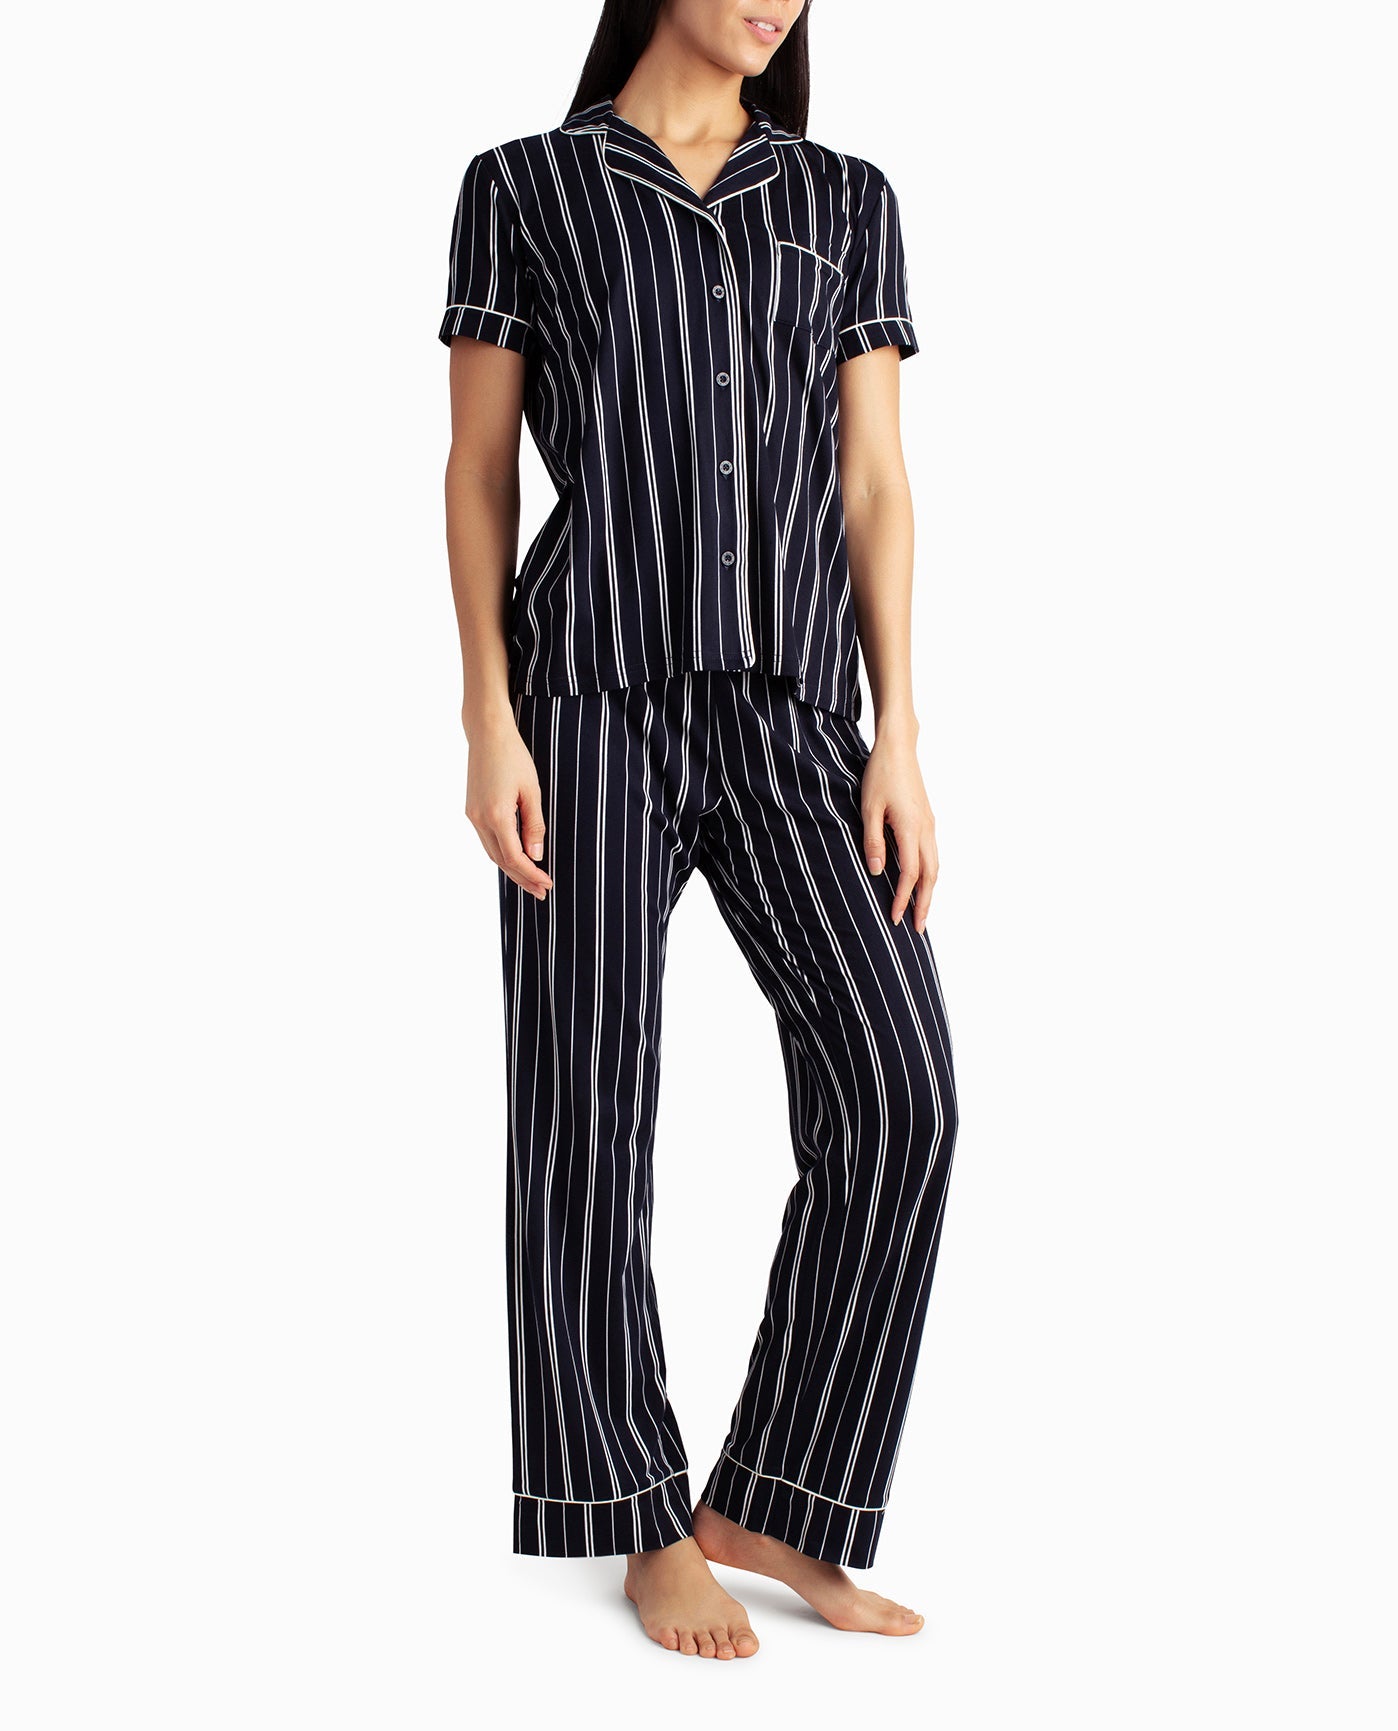 SIDE OF PEACHED JERSEY SHIRT AND PANT TWO-PIECE SLEEPWEAR SET | Stormy Night Vertical Stripe